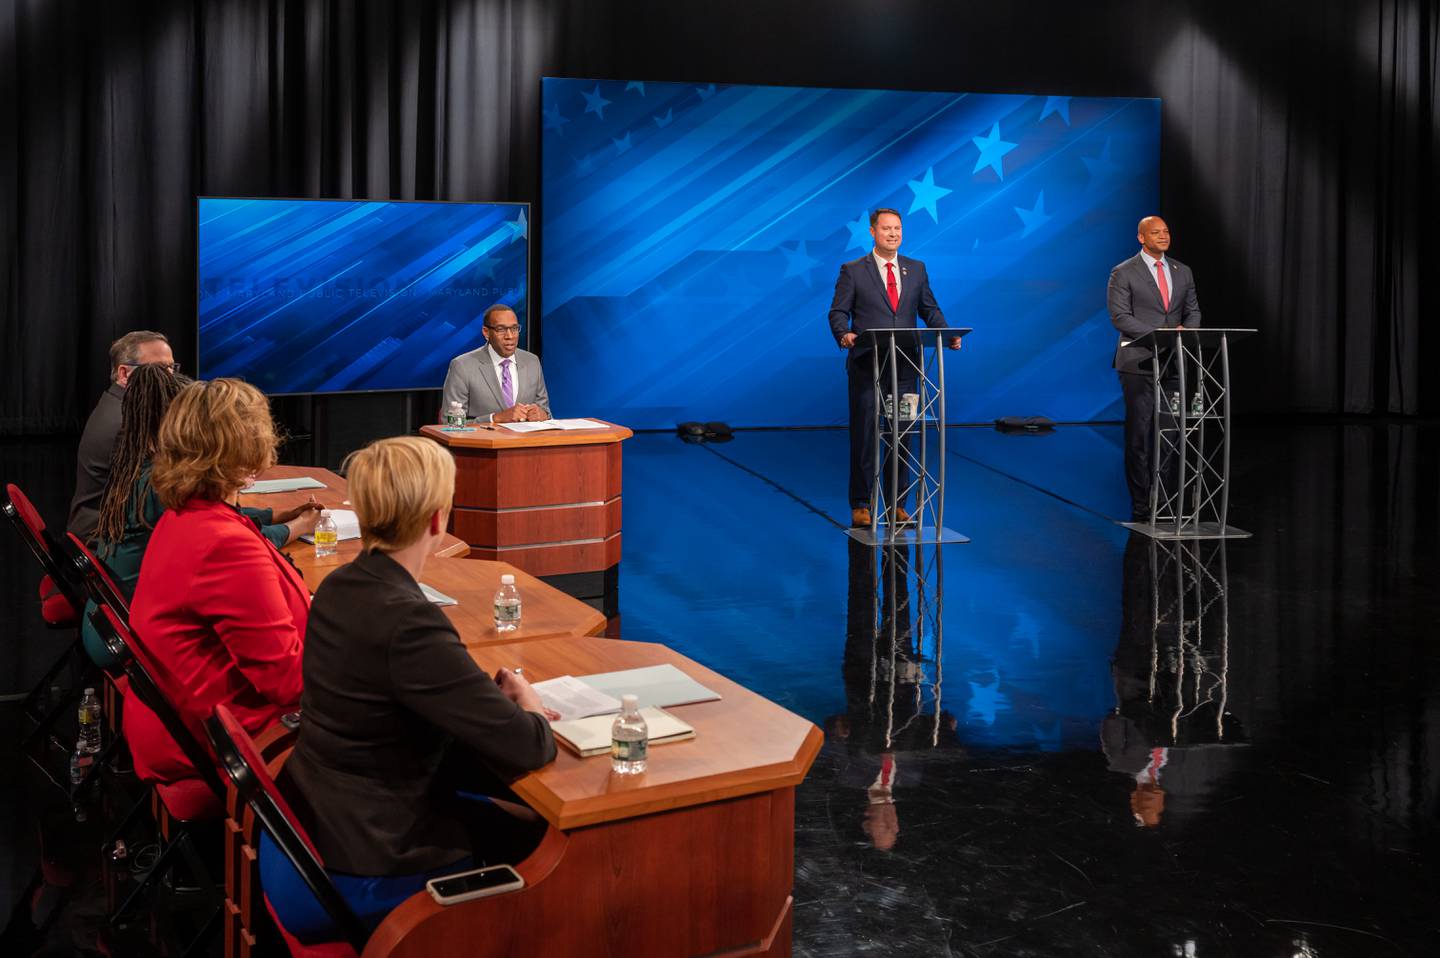 Dan Cox stands at a lectern in the center of the stage. Wes Moore stands at a lectern stage left. Stage right, the debate moderator and panelists sit at desks.